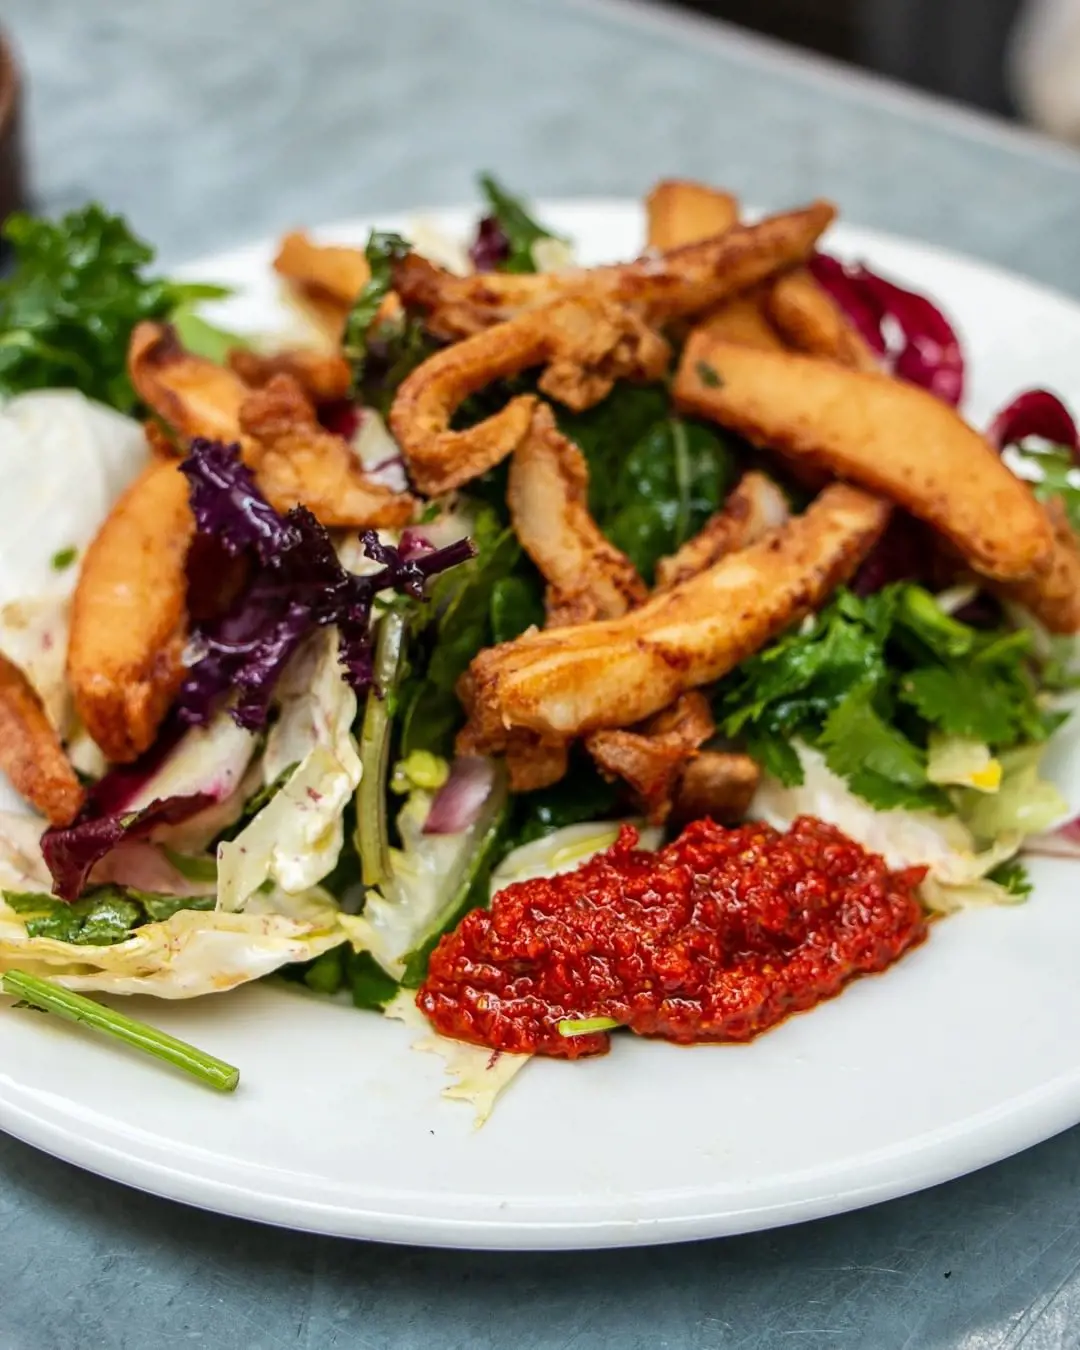 Deep-fried cuttlefish with harissa and herb salad